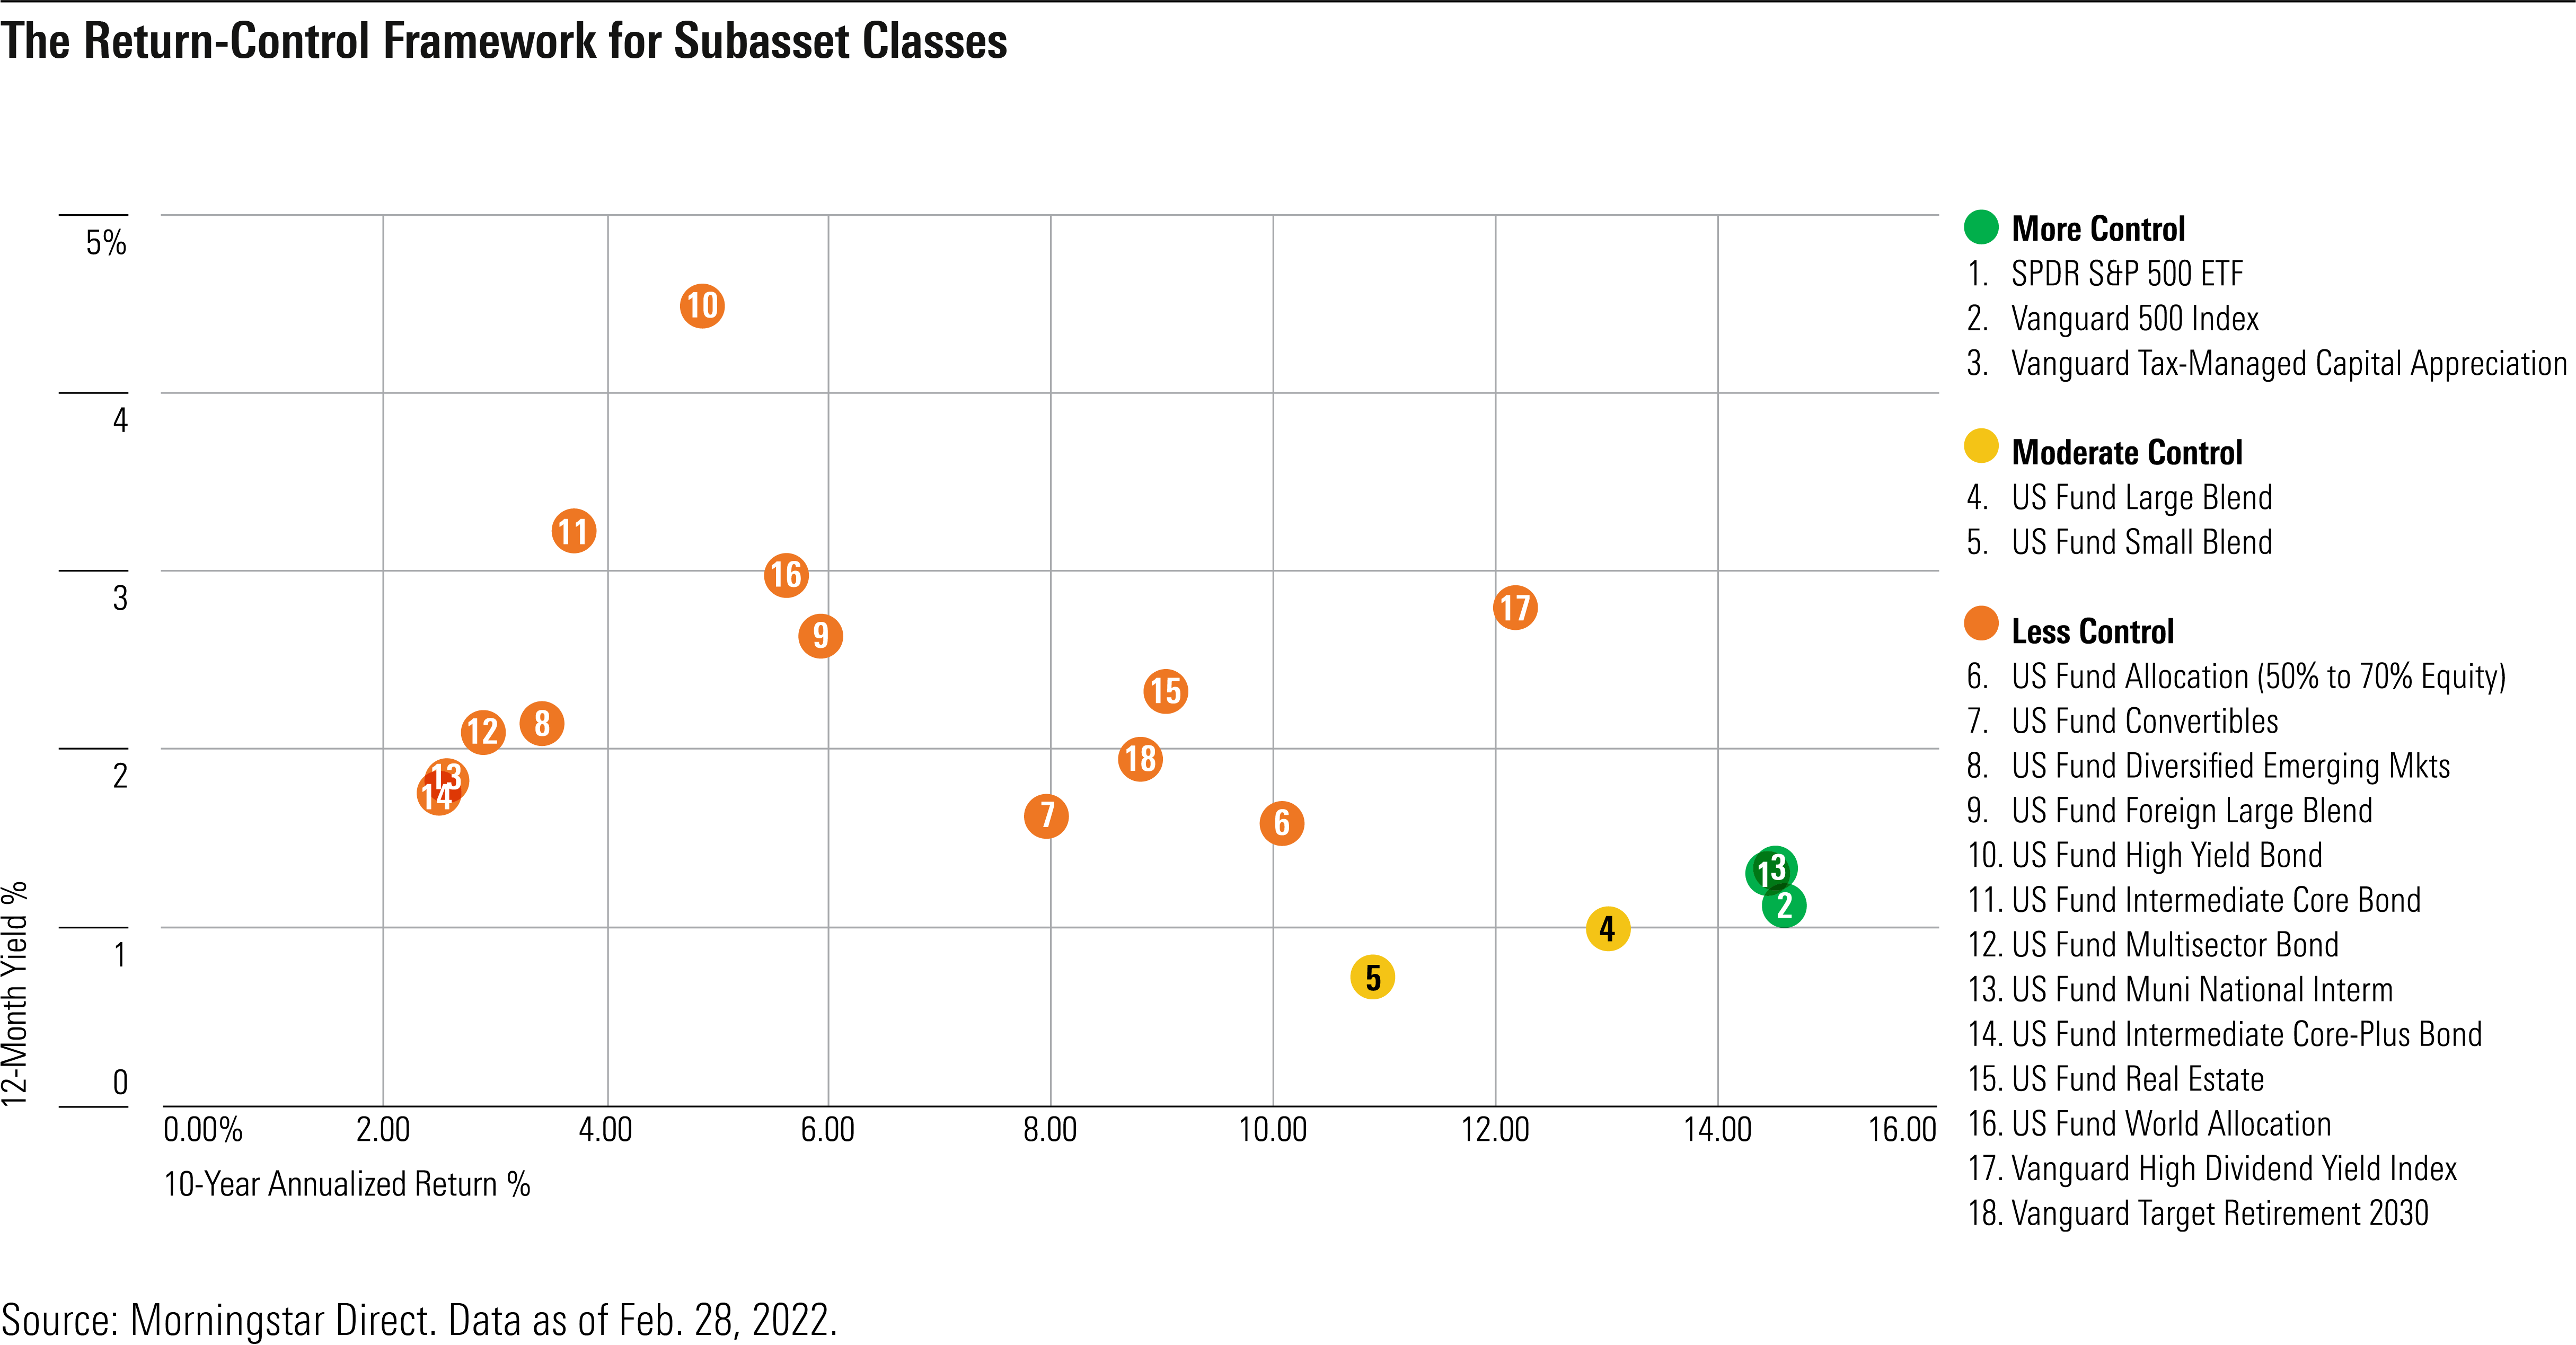 A scatterplot shows the 12-month yield and 10-year return of different subset classes.